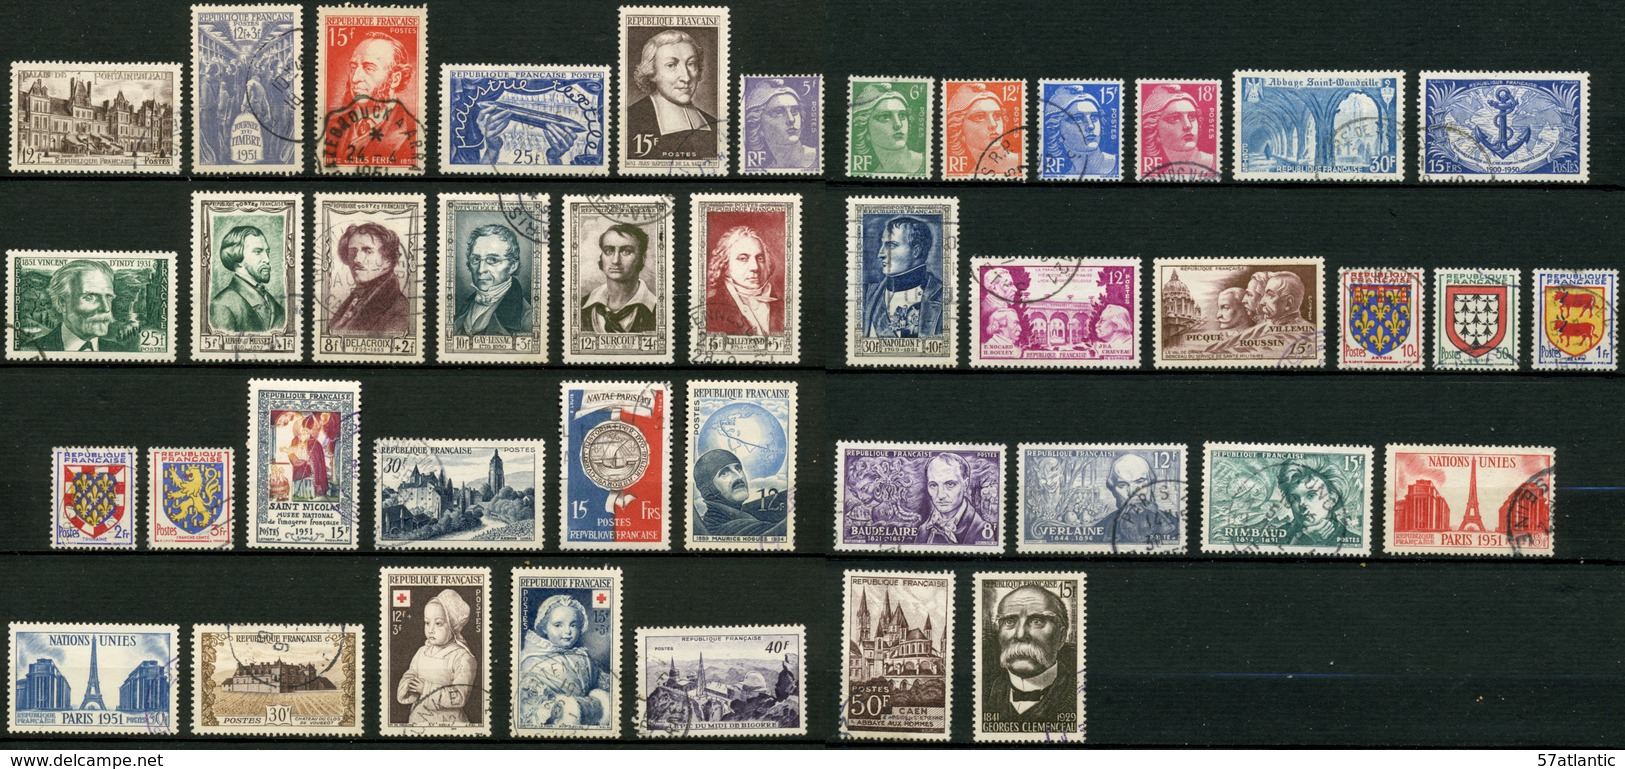 FRANCE - ANNEE COMPLETE 1951 - YT 878 à 918 - 41 TIMBRES OBLITERES - 1950-1959